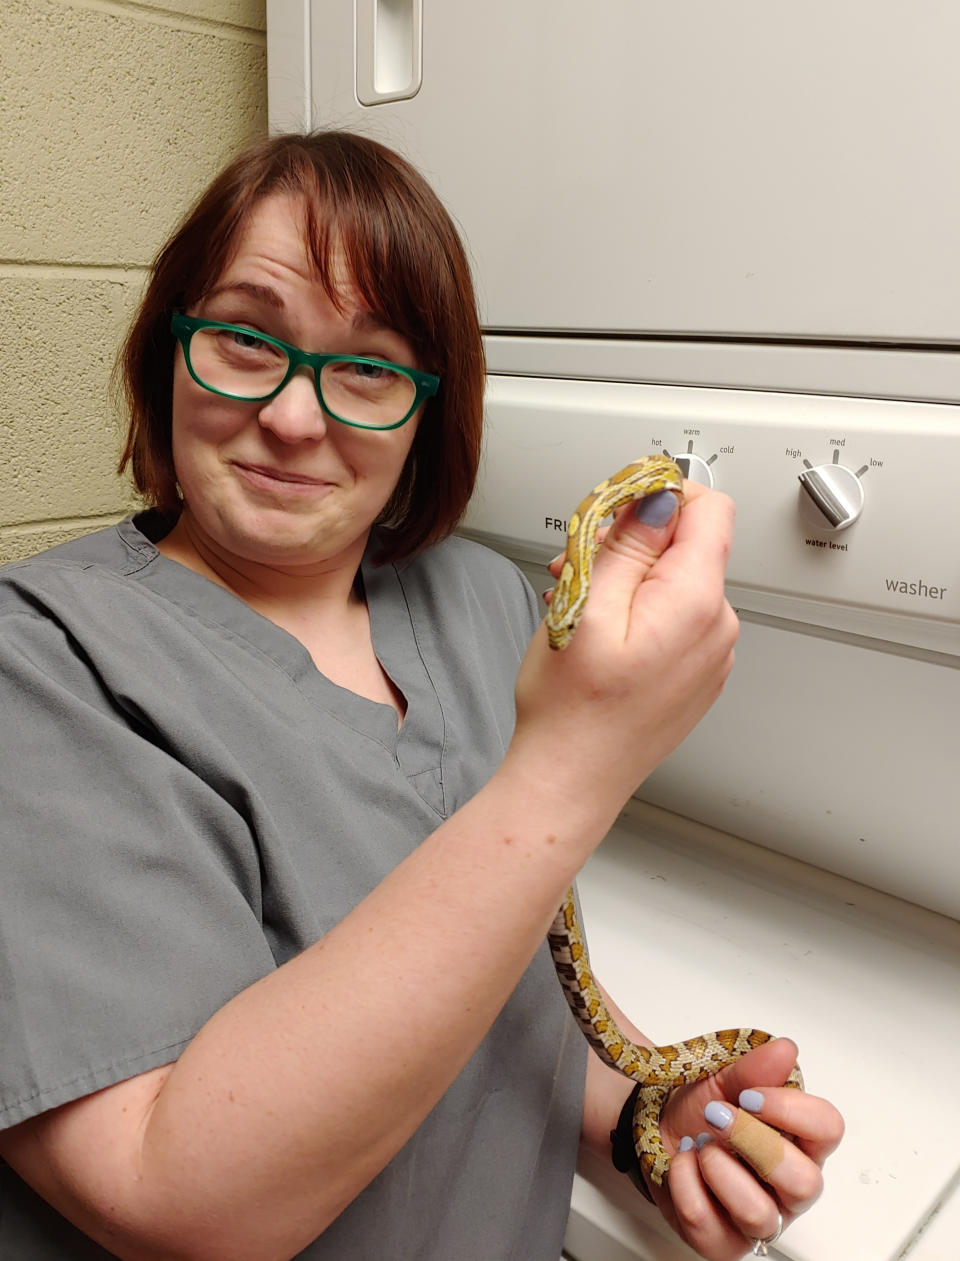 In this May 8, 2019, photo provided by Chicago Exotics, veterinarian Dr. Melissa Giese of Chicago Exotics Animal Hospital holds a corn snake at Chicago Exotics in Skokie, Ill. The snake was found in Sanela Kamencic's washing machine in Evanston, Ill., after surviving the wash cycle. Authorities removed it and took it to Chicago Exotics to be checked out. The snake is OK and was reunited with its owner, a 12-year-old boy who lives nearby. (Chicago Exotics via AP)